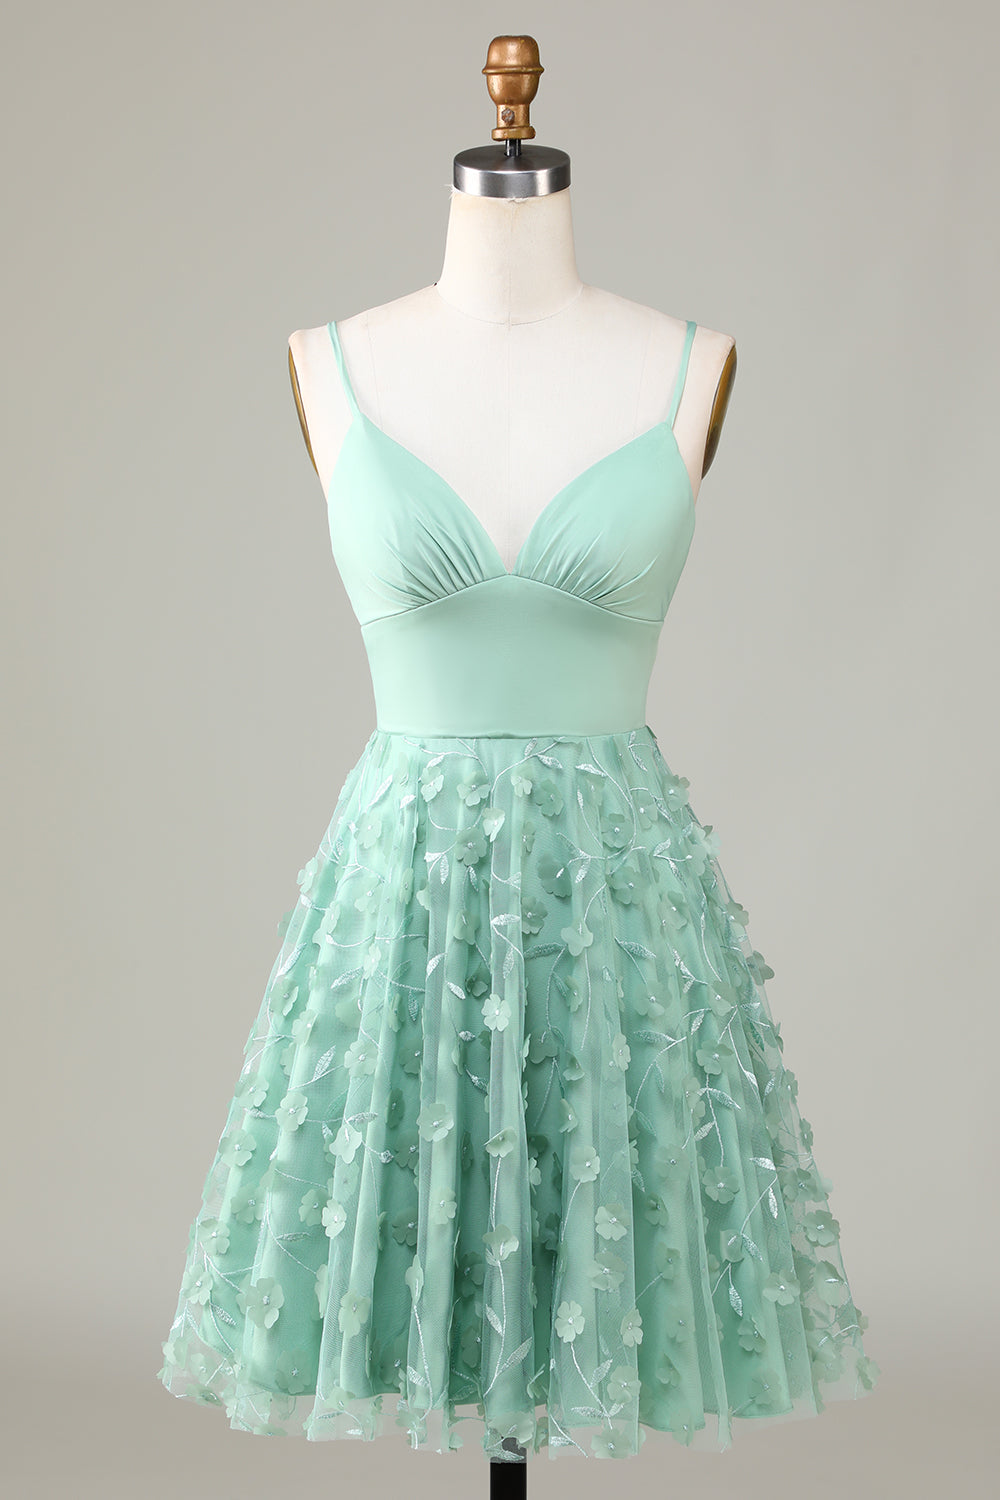 Green A-Line Spaghetti Straps Short Bridesmaid Dress With Appliques